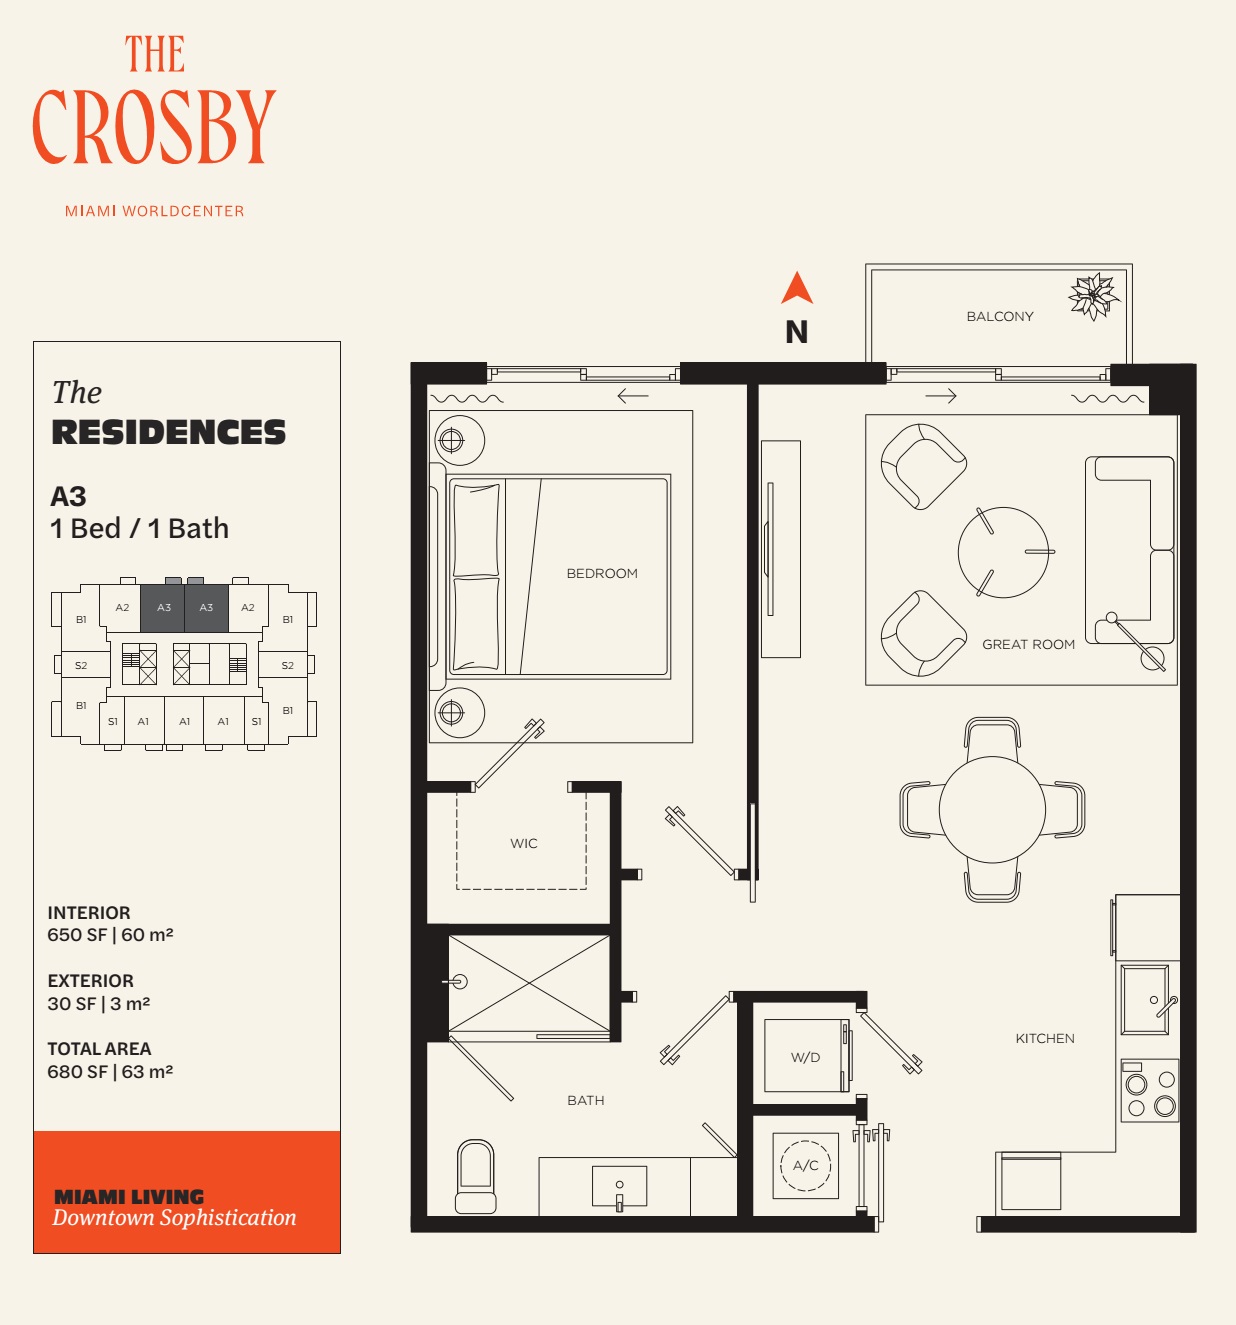 The Crosby Miami Worldcenter Residence A3